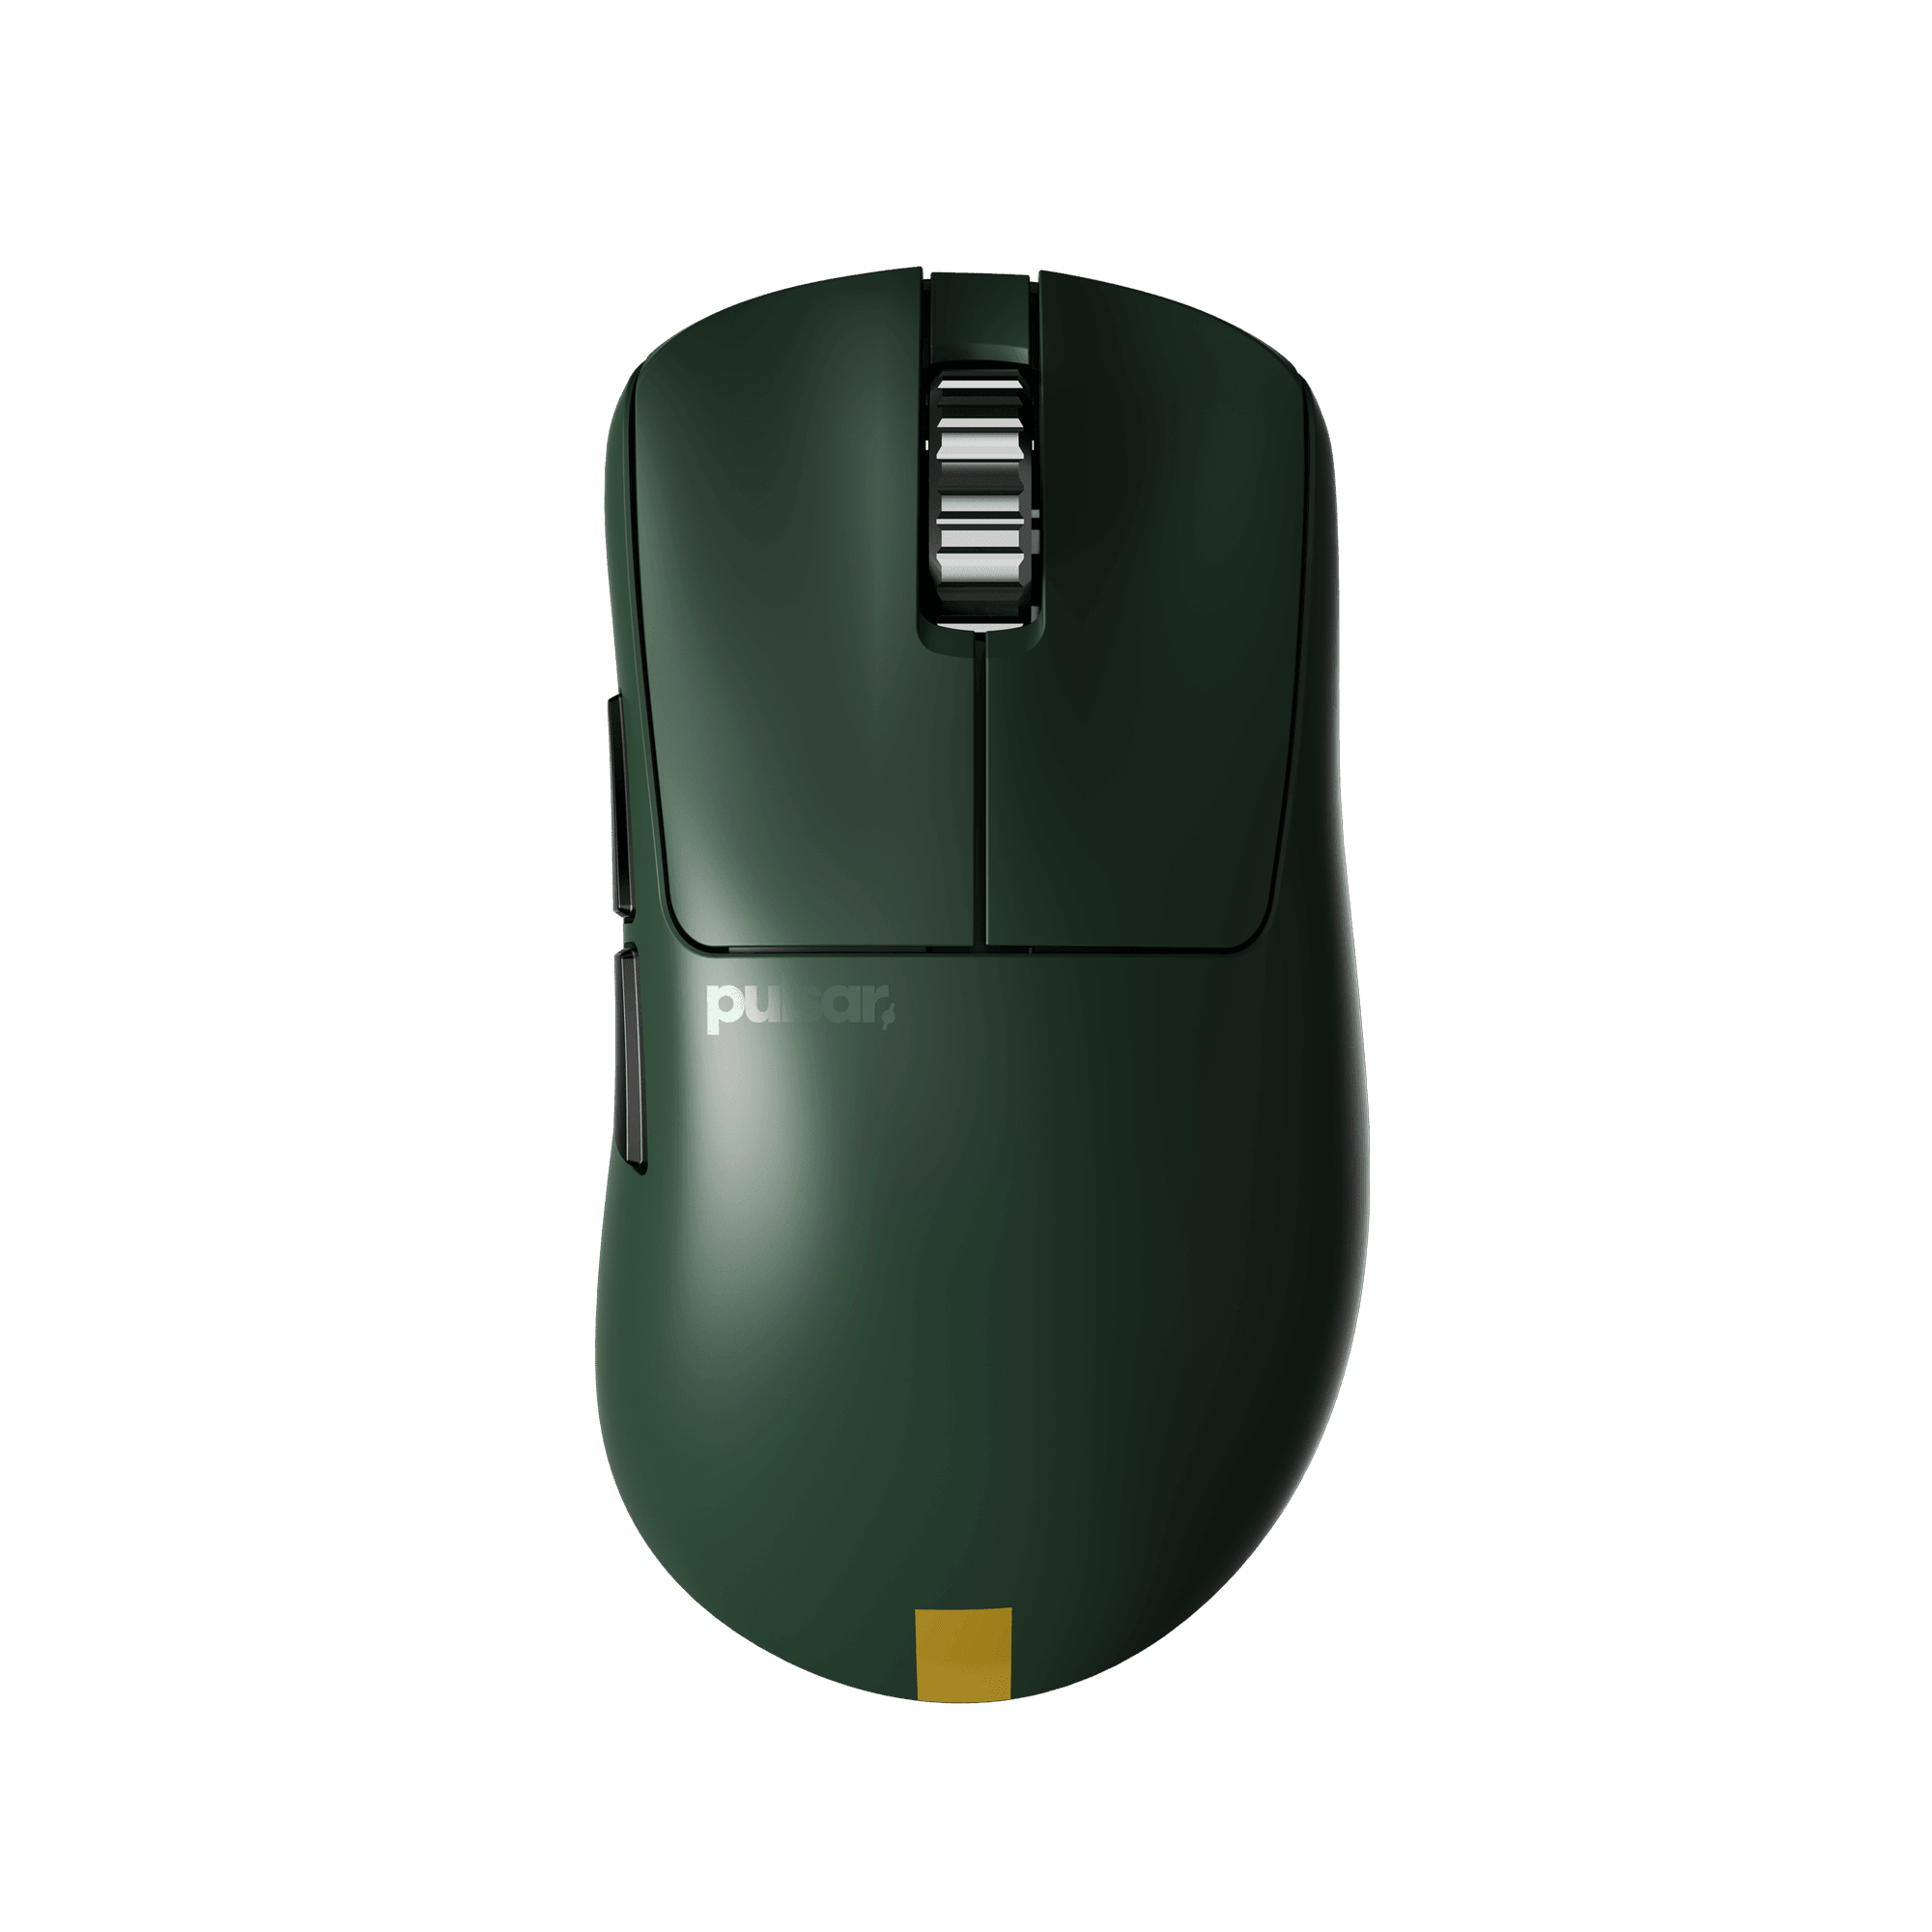 Founder's Edition] Xlite V3 eS Gaming Mouse – Pulsar Gaming Gears